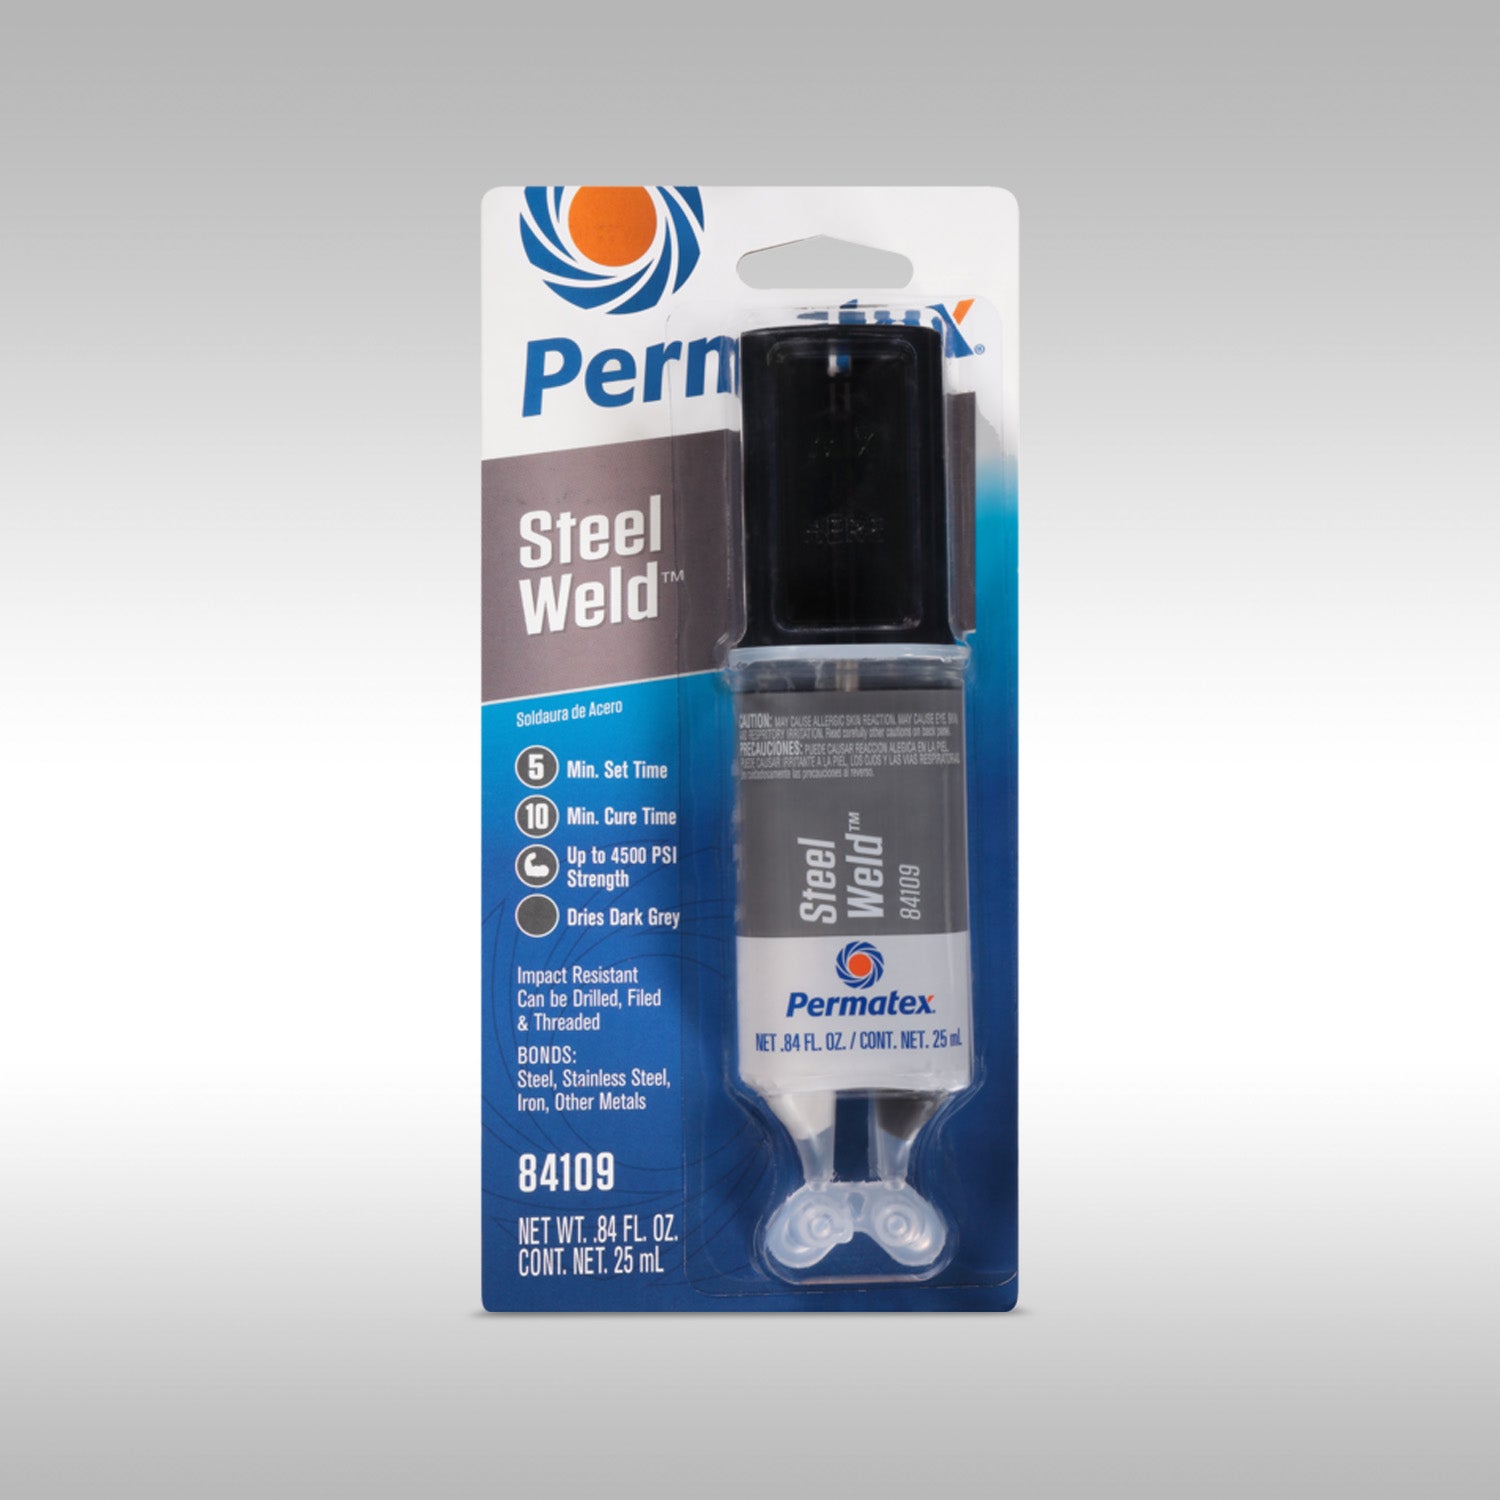 Permatex® Steel Weld® is Ideal for complex, multi-piece assemblies. Bonds rigid materials including aluminum, brass, chrome, copper, iron, stainless steel, steel. Use to seal welded seams, fills metal cracks, and mount metal components.